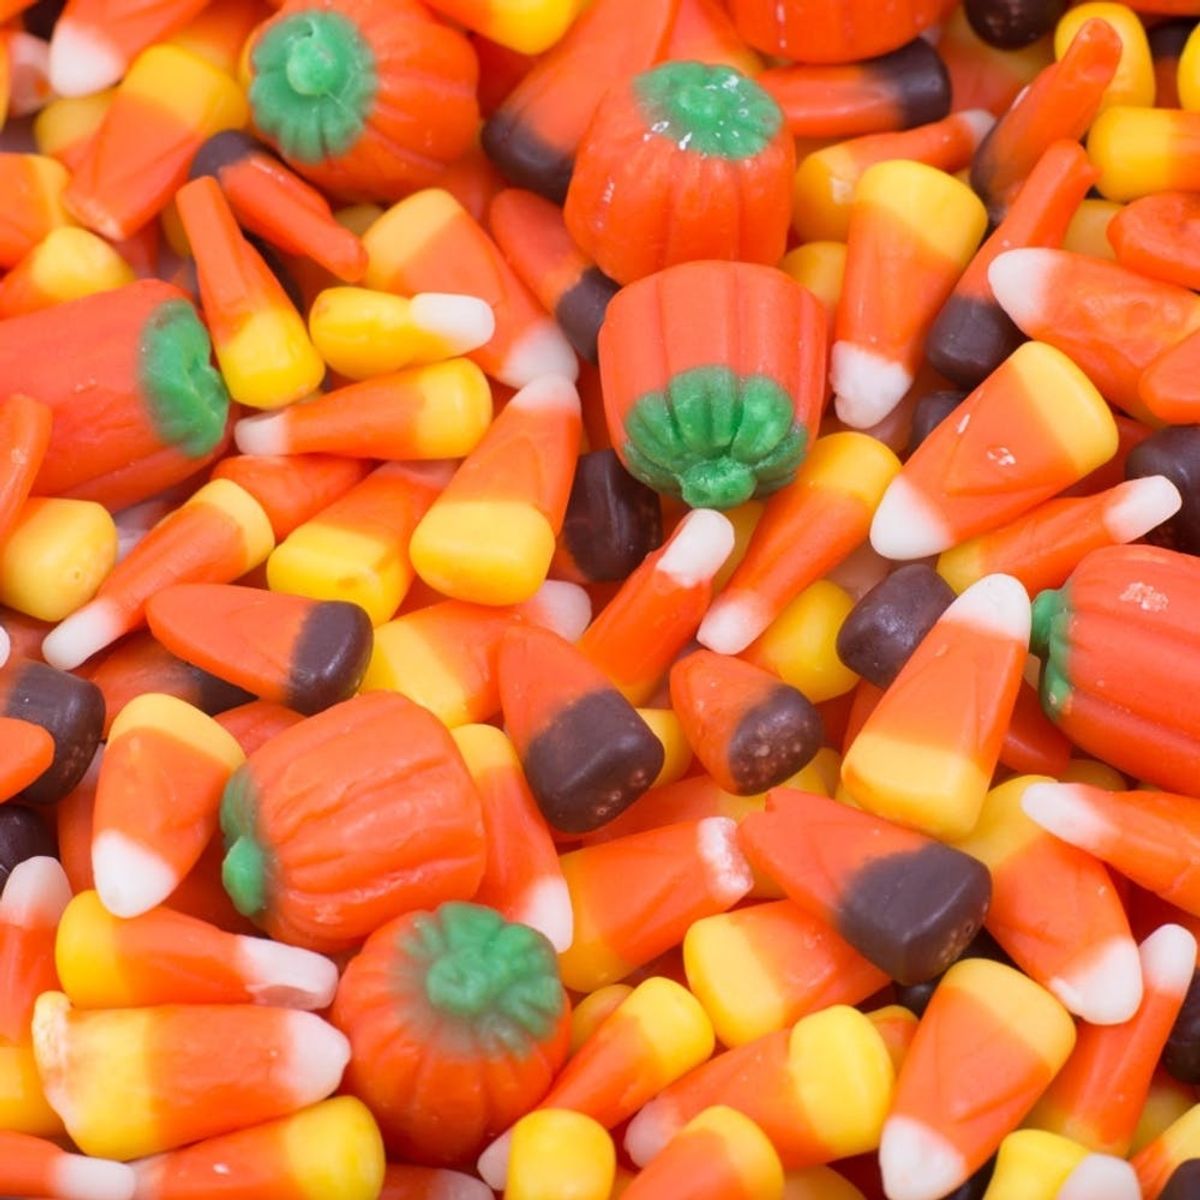 The Reason Daylight Savings Time Happens AFTER Halloween Is a CANDY CONSPIRACY